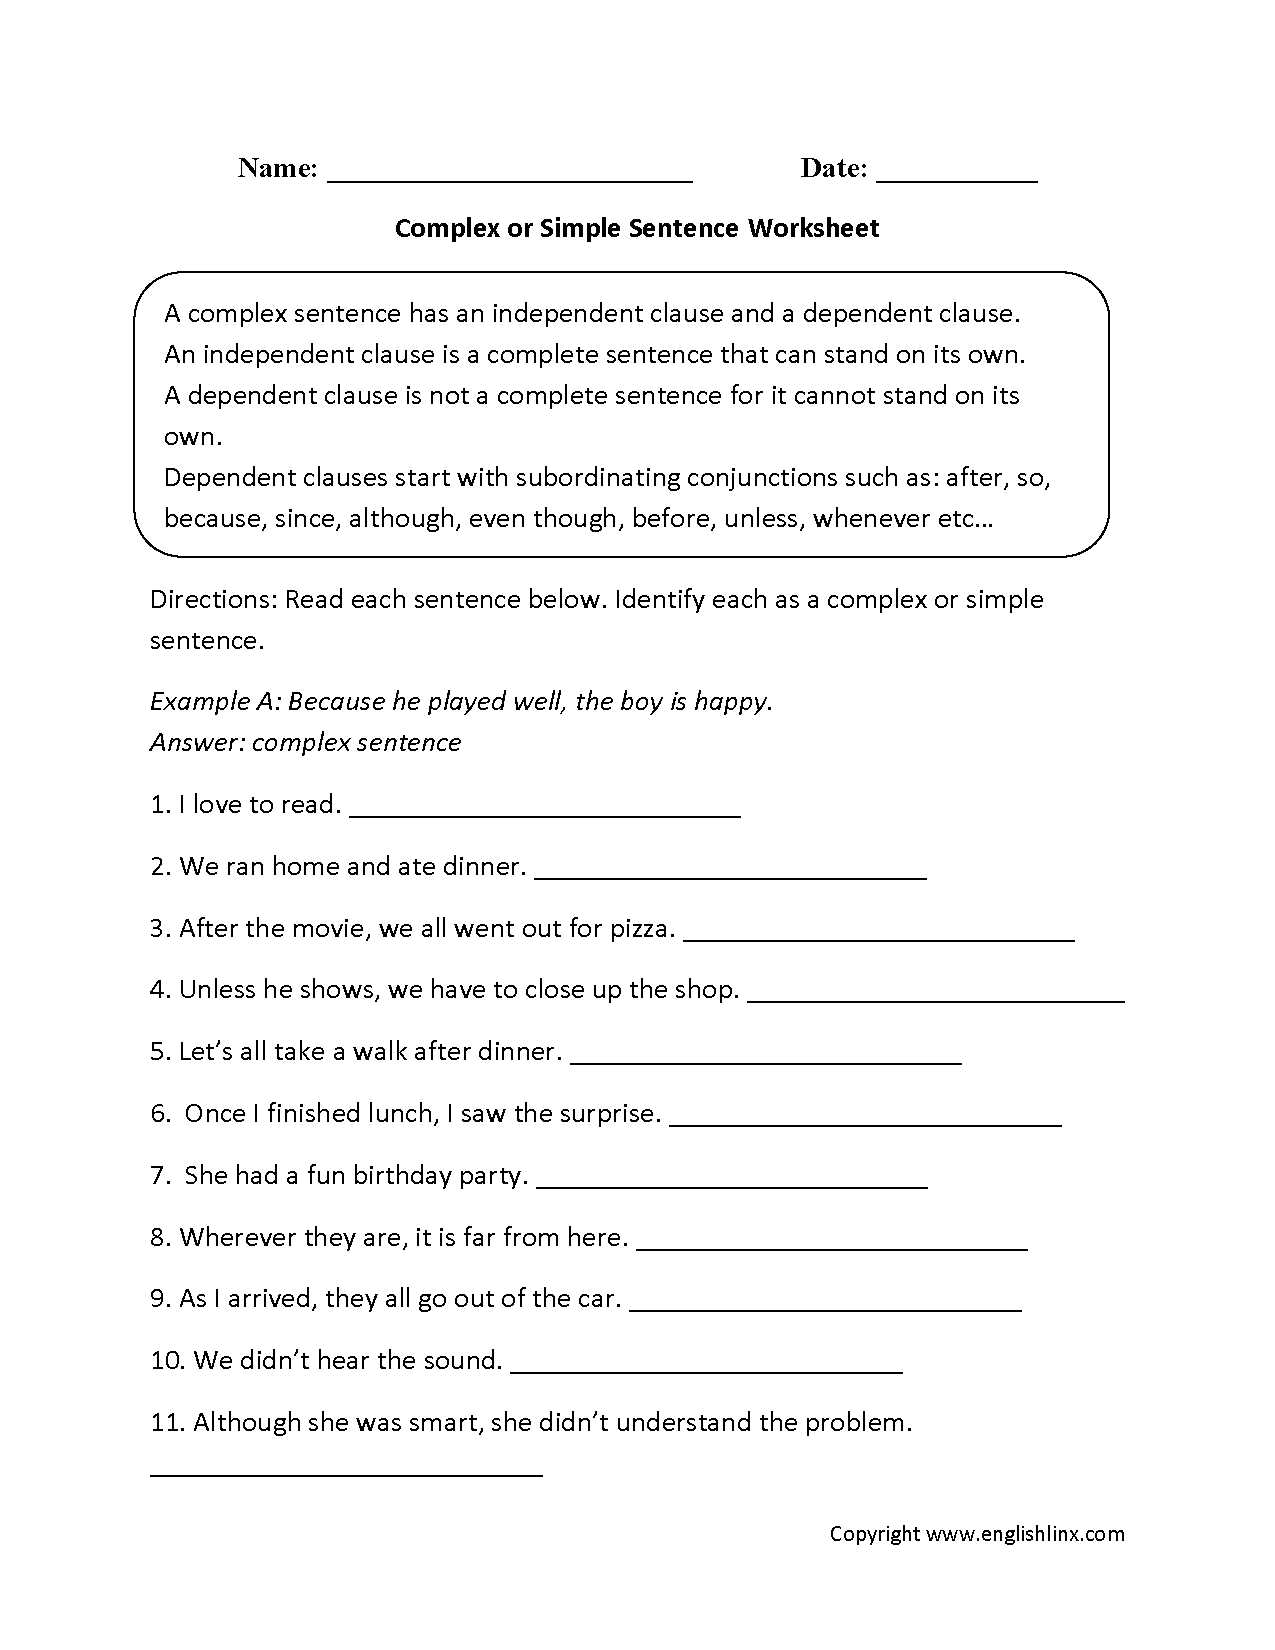 Paragraph Editing Worksheets together with Plex or Simple Sentences Worksheet Mona Pinterest